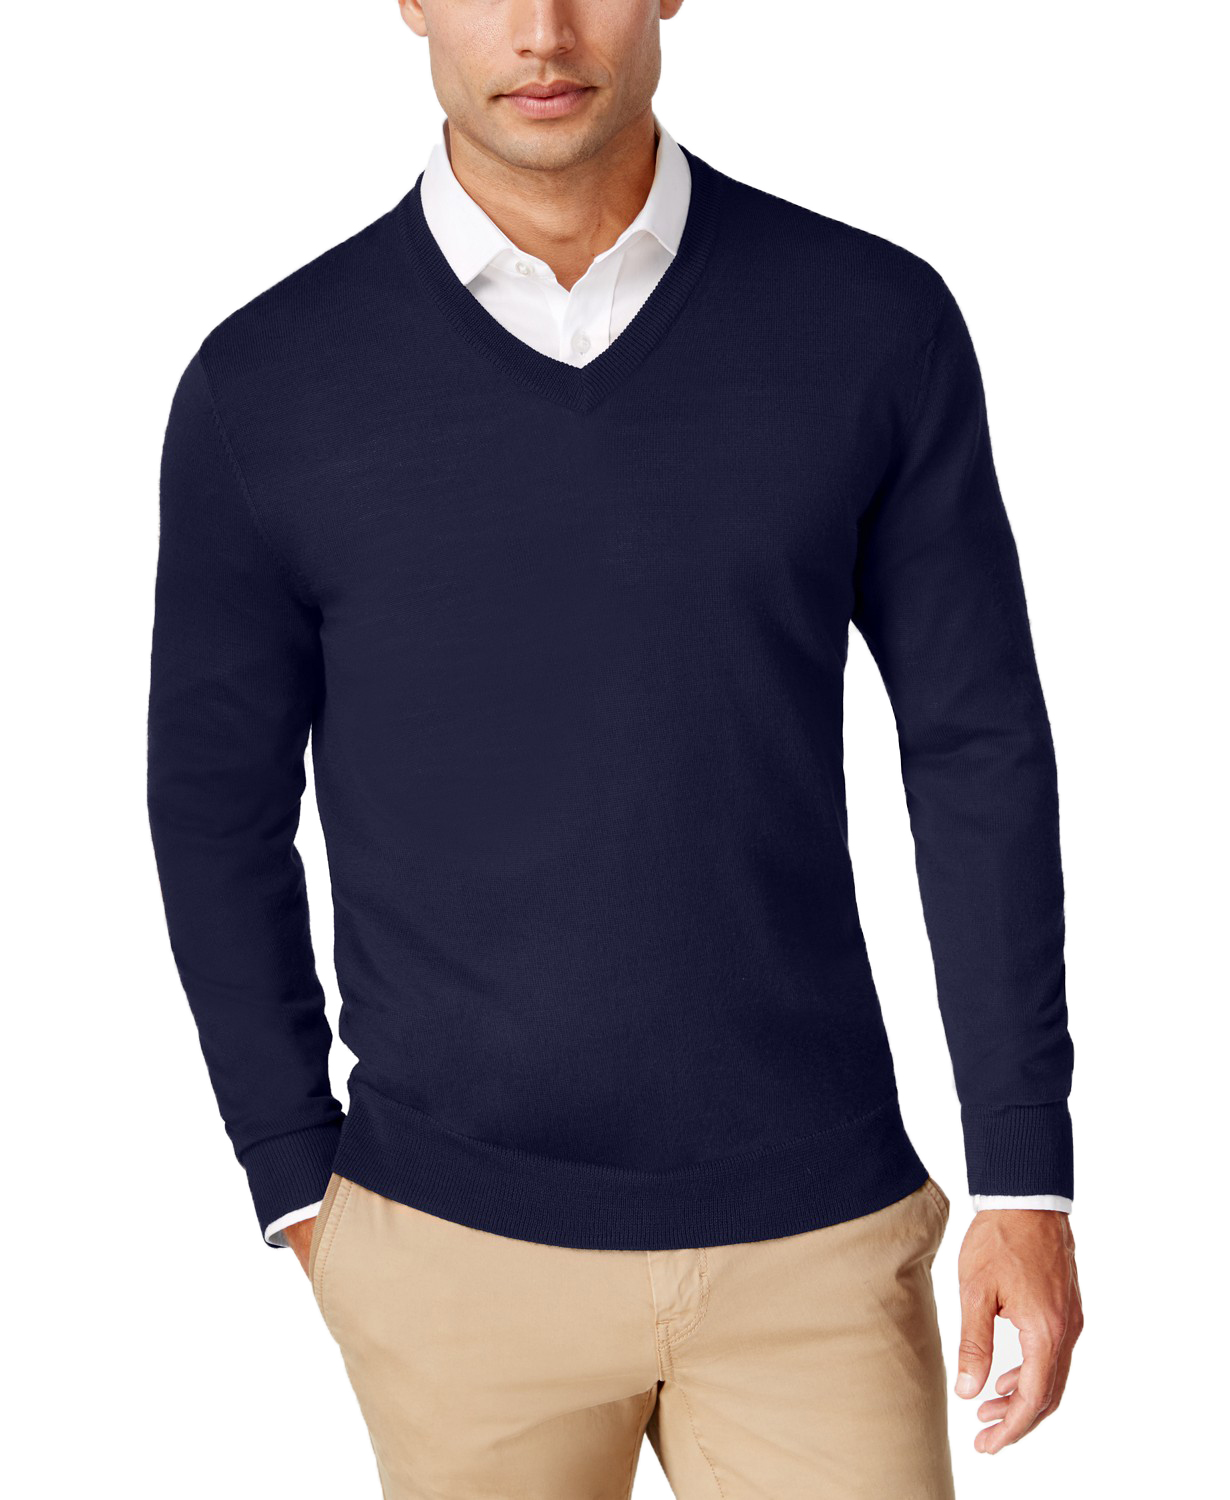 woocommerce-673321-2209615.cloudwaysapps.com-club-room-mens-navy-merino-wool-blend-solid-v-neck-sweater